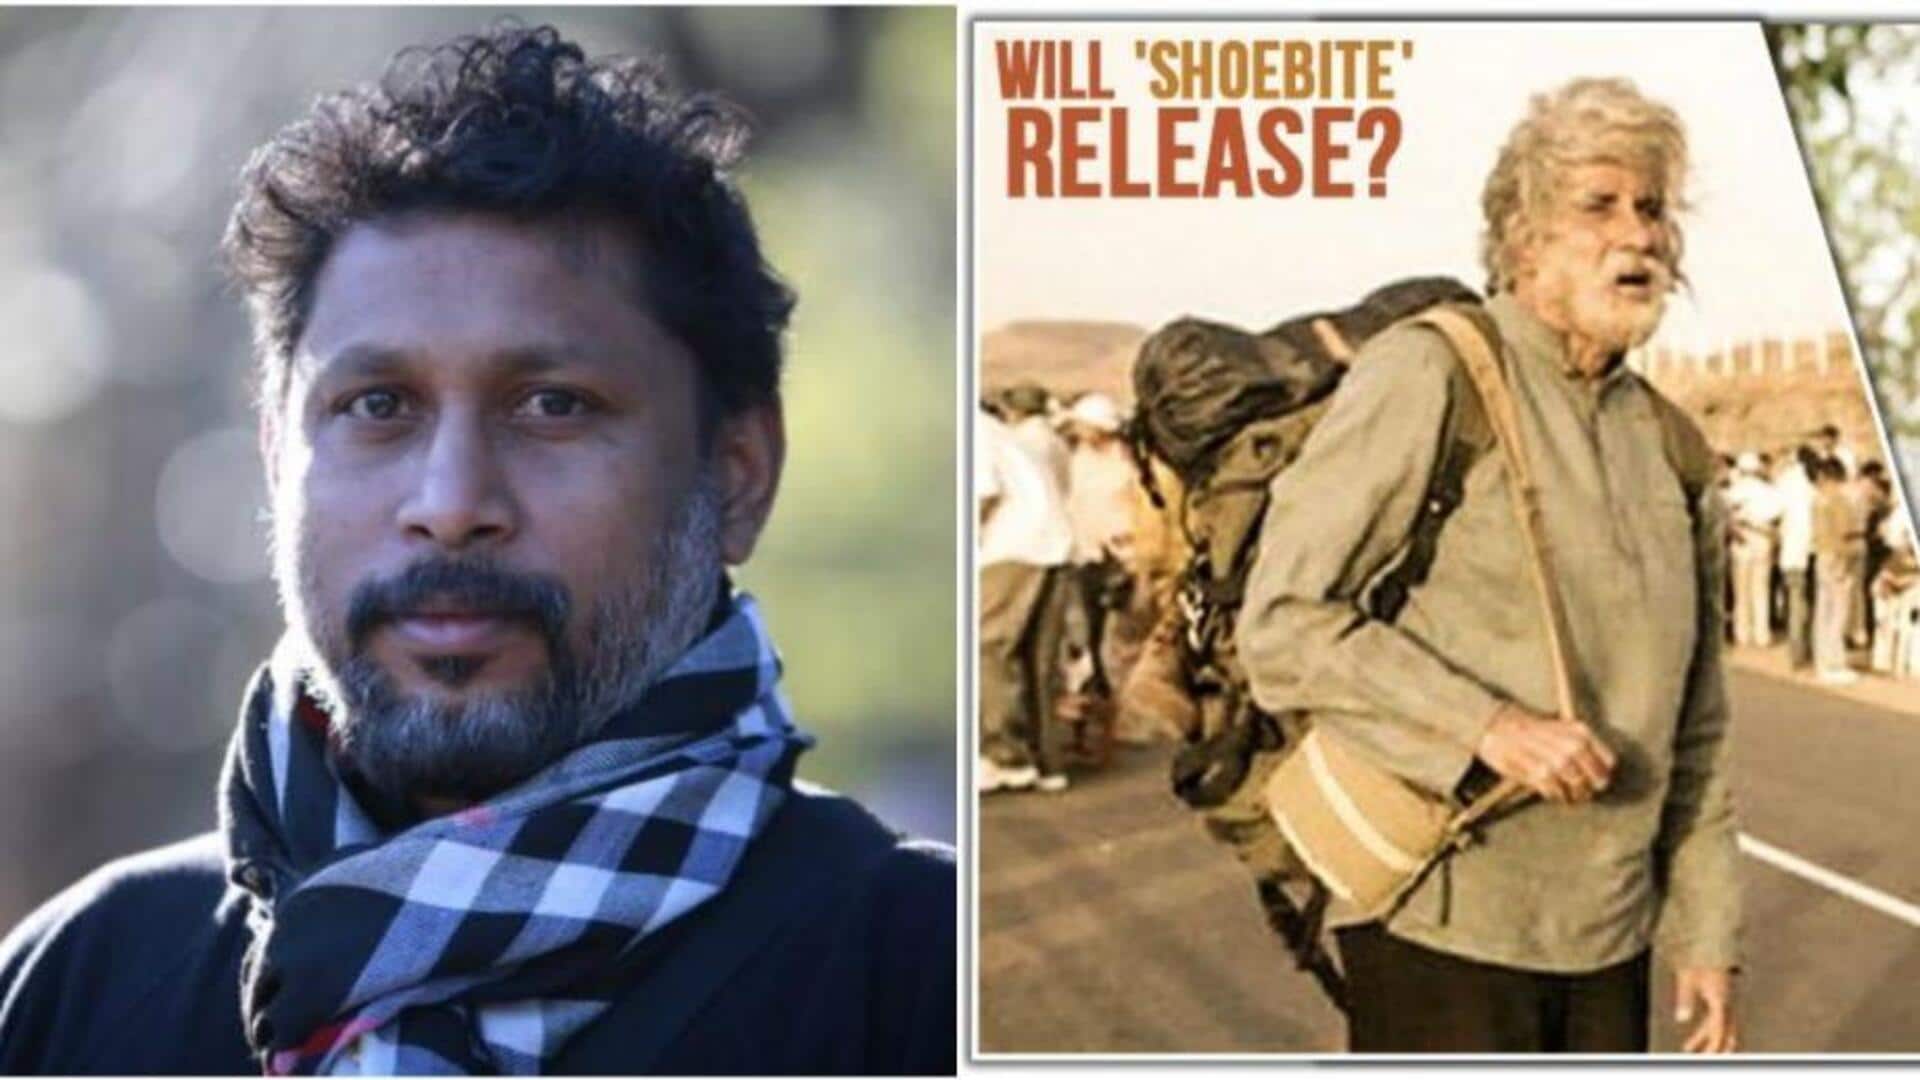 Shoojit Sircar-Amitabh Bachchan's 'Shoebite' to release soon? What we know